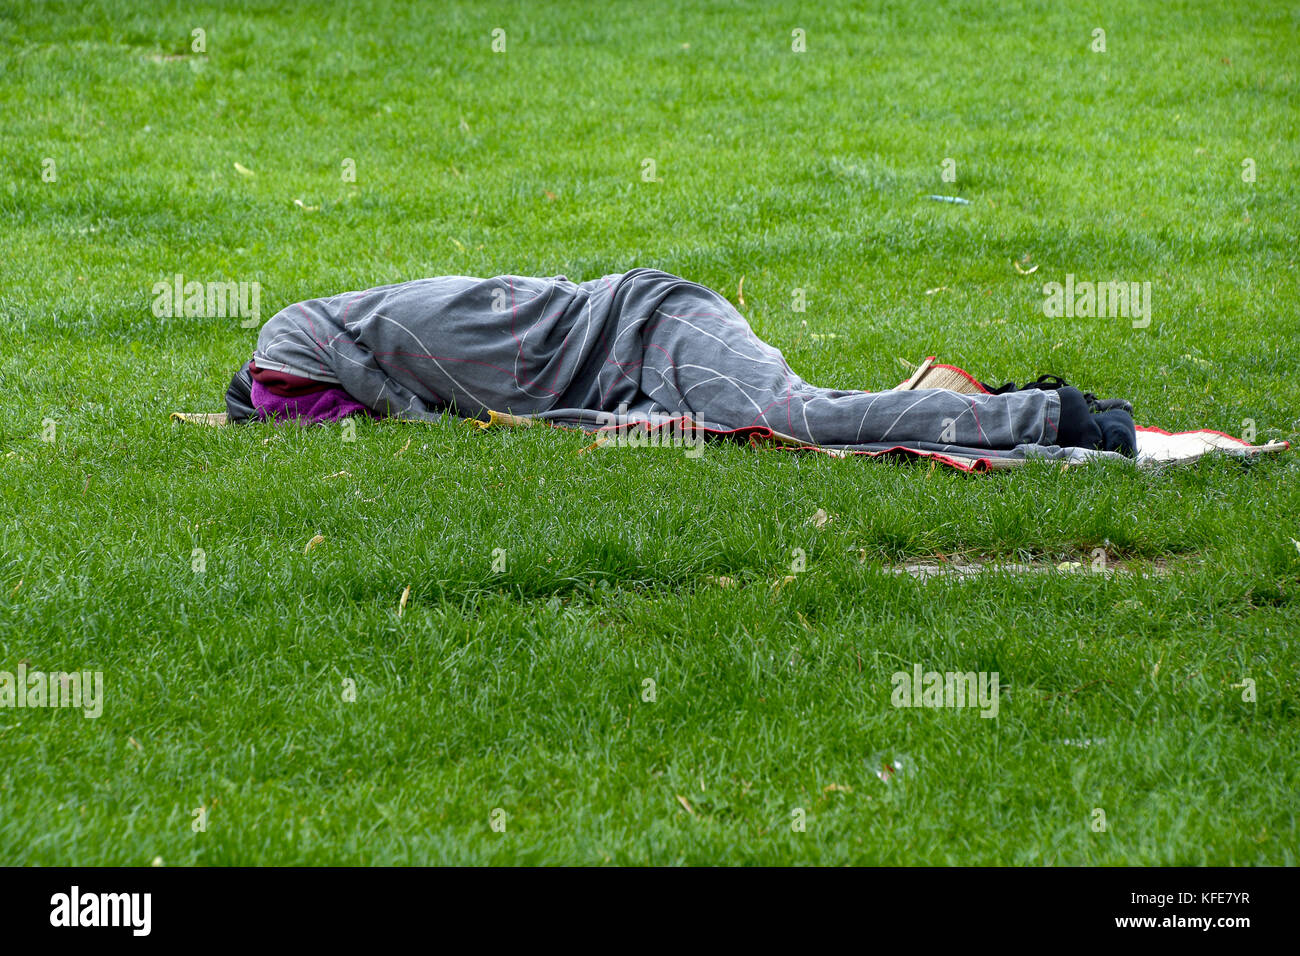 sleeping homeless person wrapped in a gray blanket on grass Stock Photo